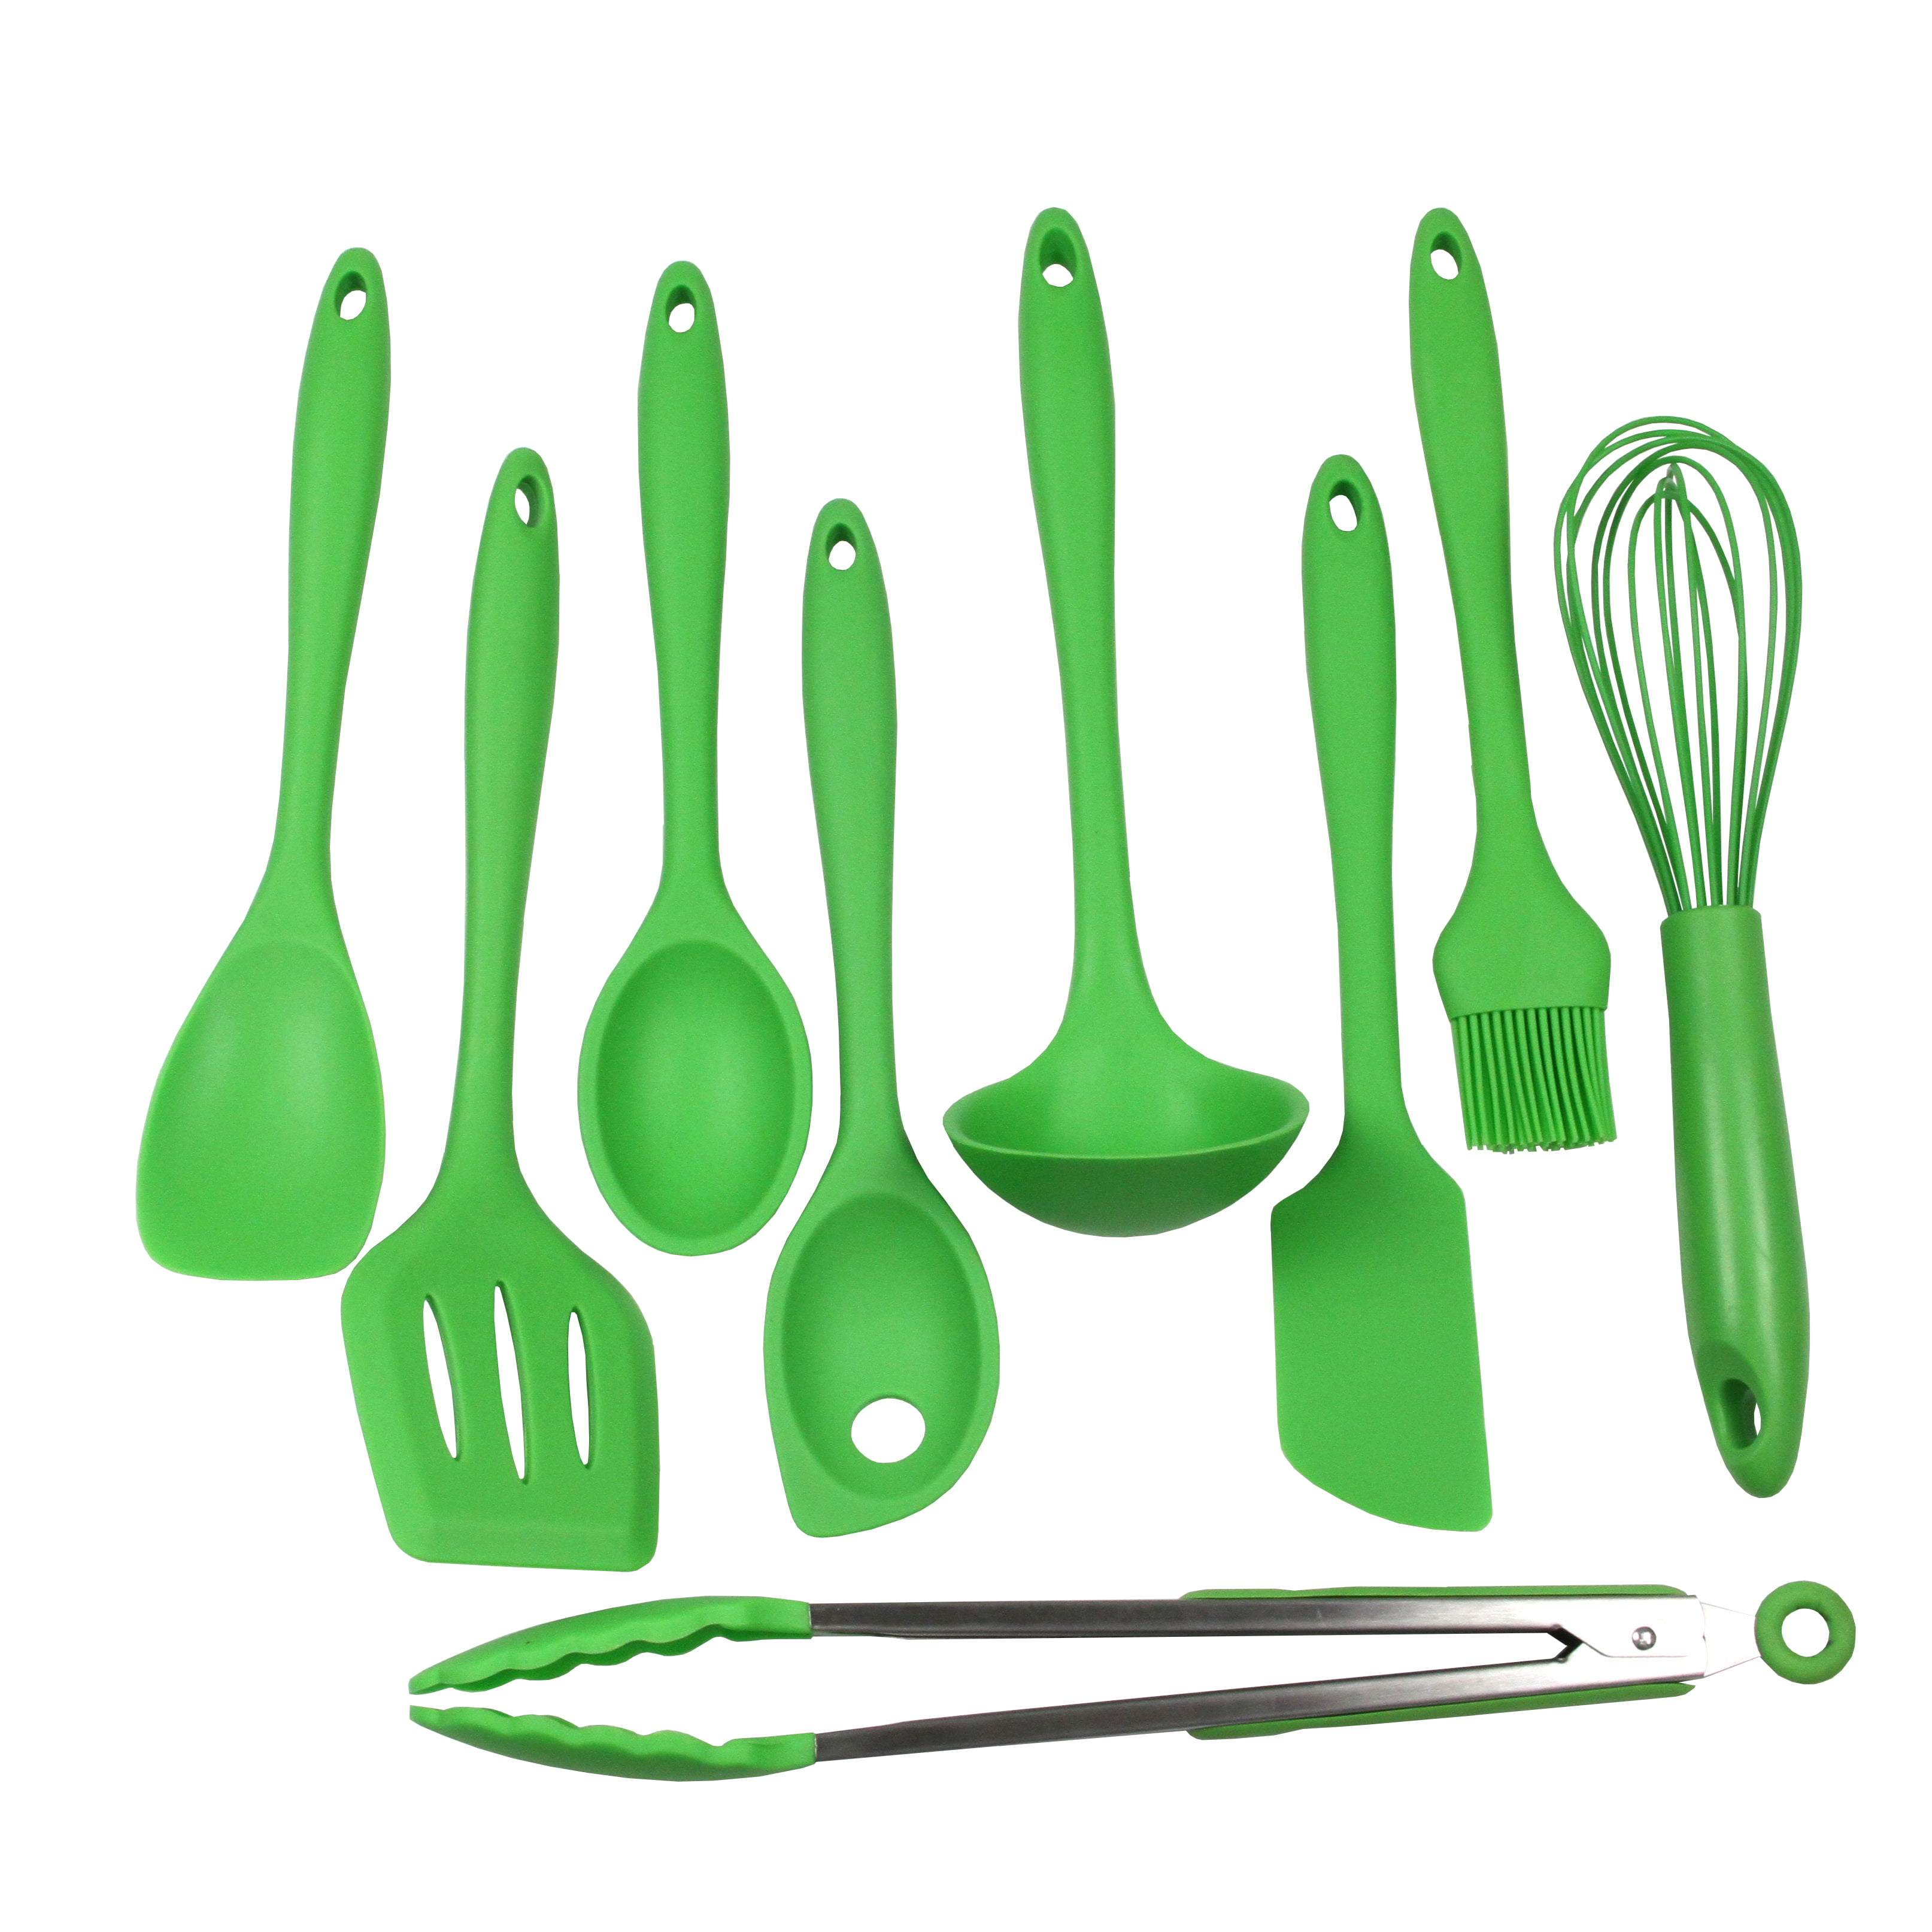 19pcs Kitchen Utensils And Knife Set Including Knife Block, 9pcs Silicone  Cooking Utensil Set, 5pcs Sharp Stainless Steel Chef Knives, Scissors,  Whisk, Tongs And Cutting Board (mint Green)